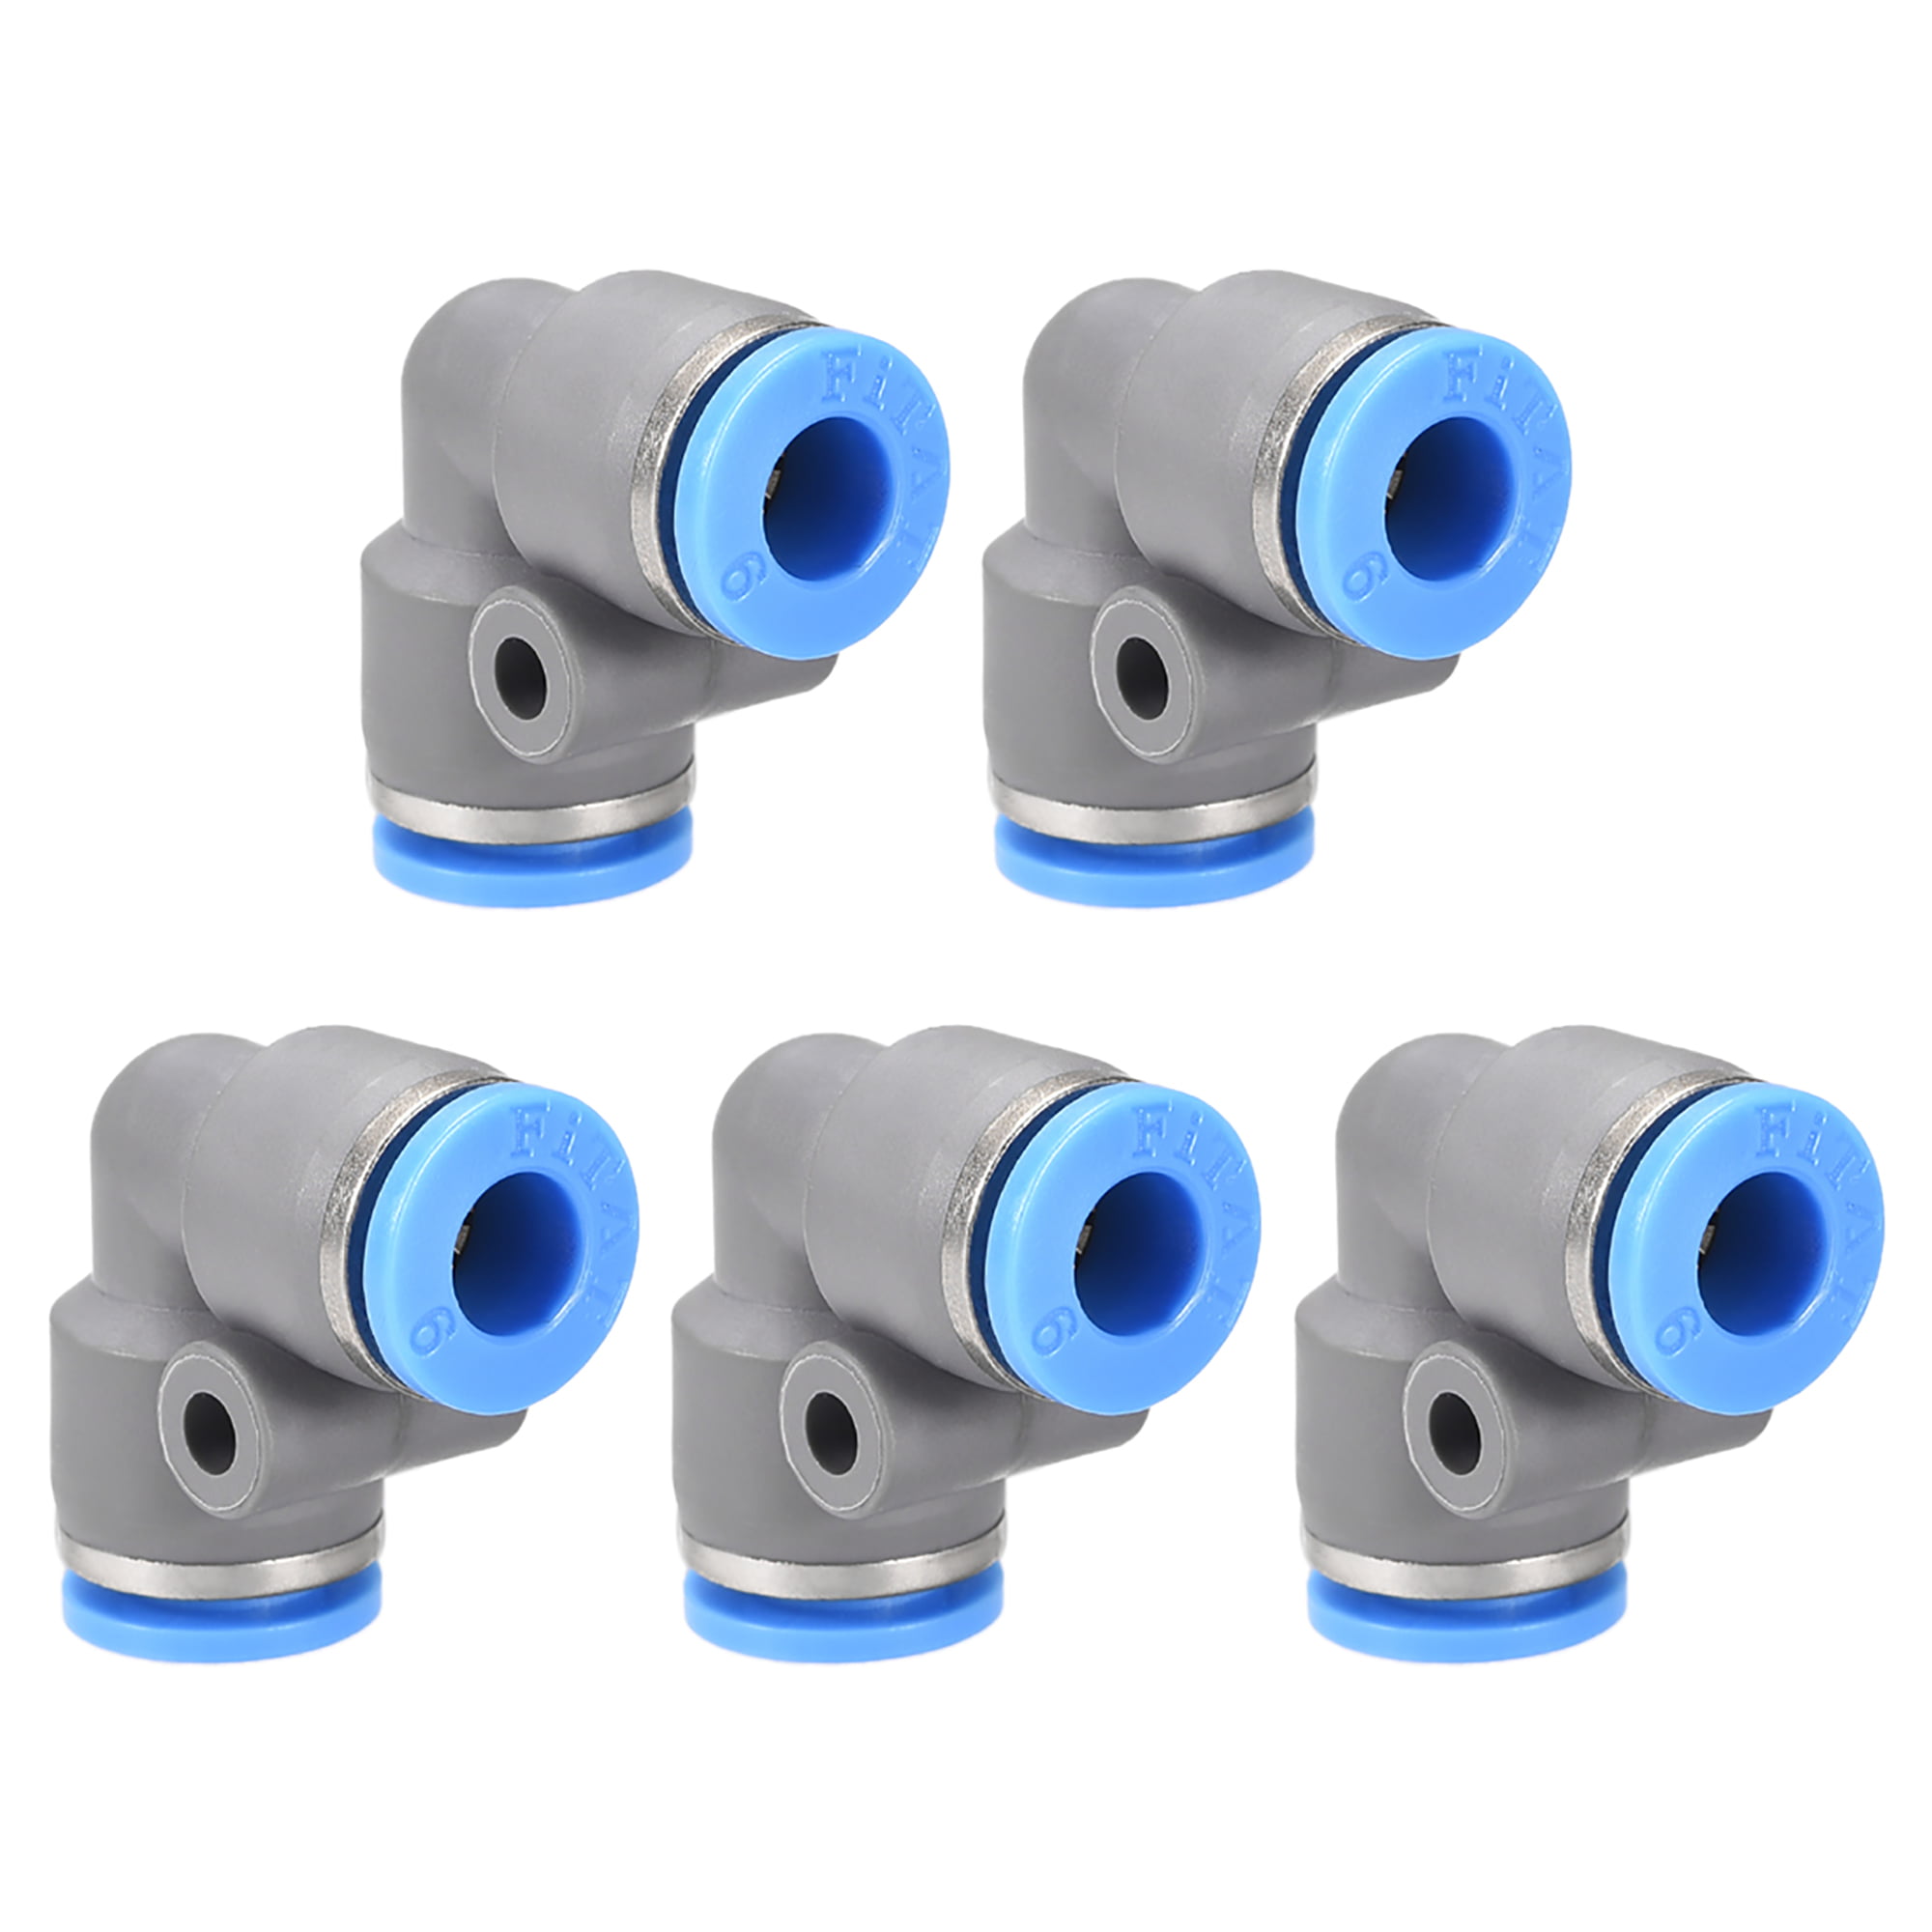 5pcs Pneumatic Elbow Connector Push In Fitting Air/Water Hose Adapter 6mm 